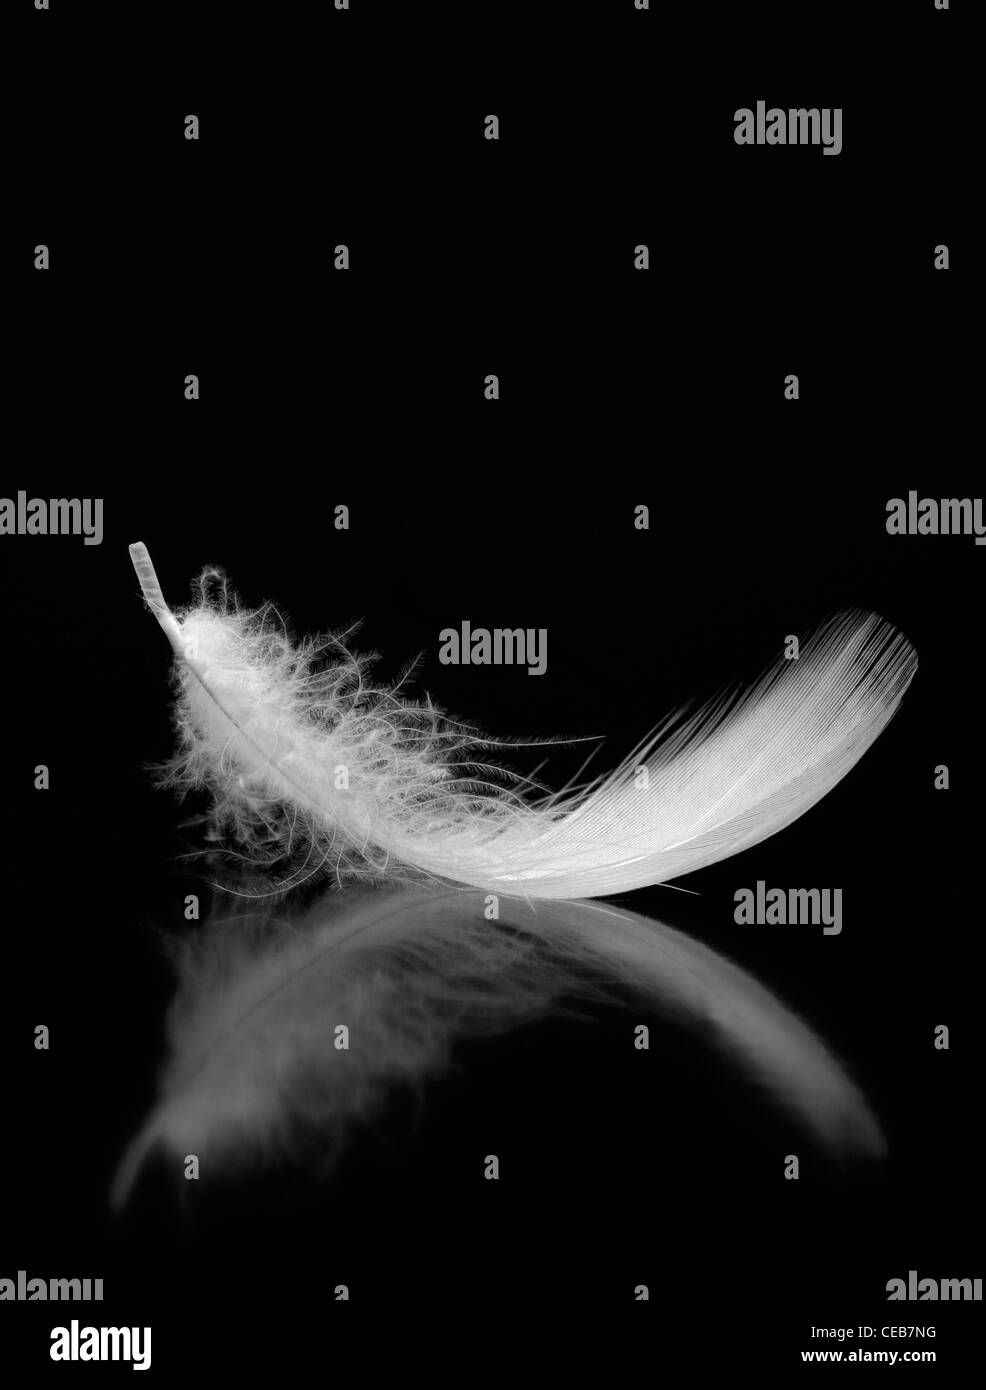 Feather. The bird's feather lies on a black background with reflexion Stock Photo